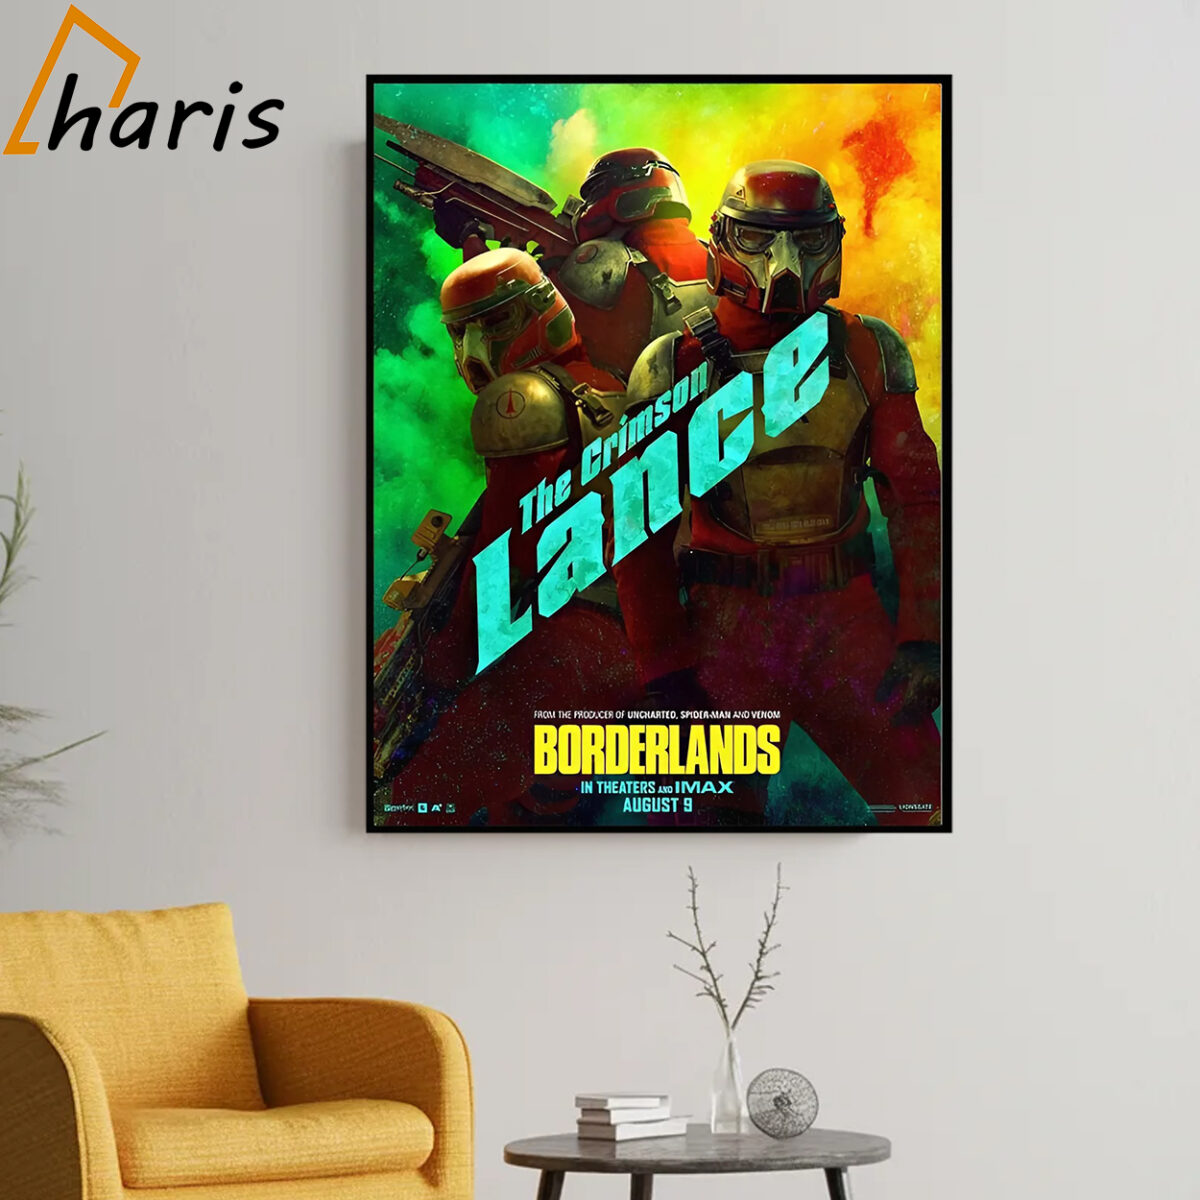 New Character Lance Posters For Borderlands Releasing In Theaters And IMAX On August 9 Poster